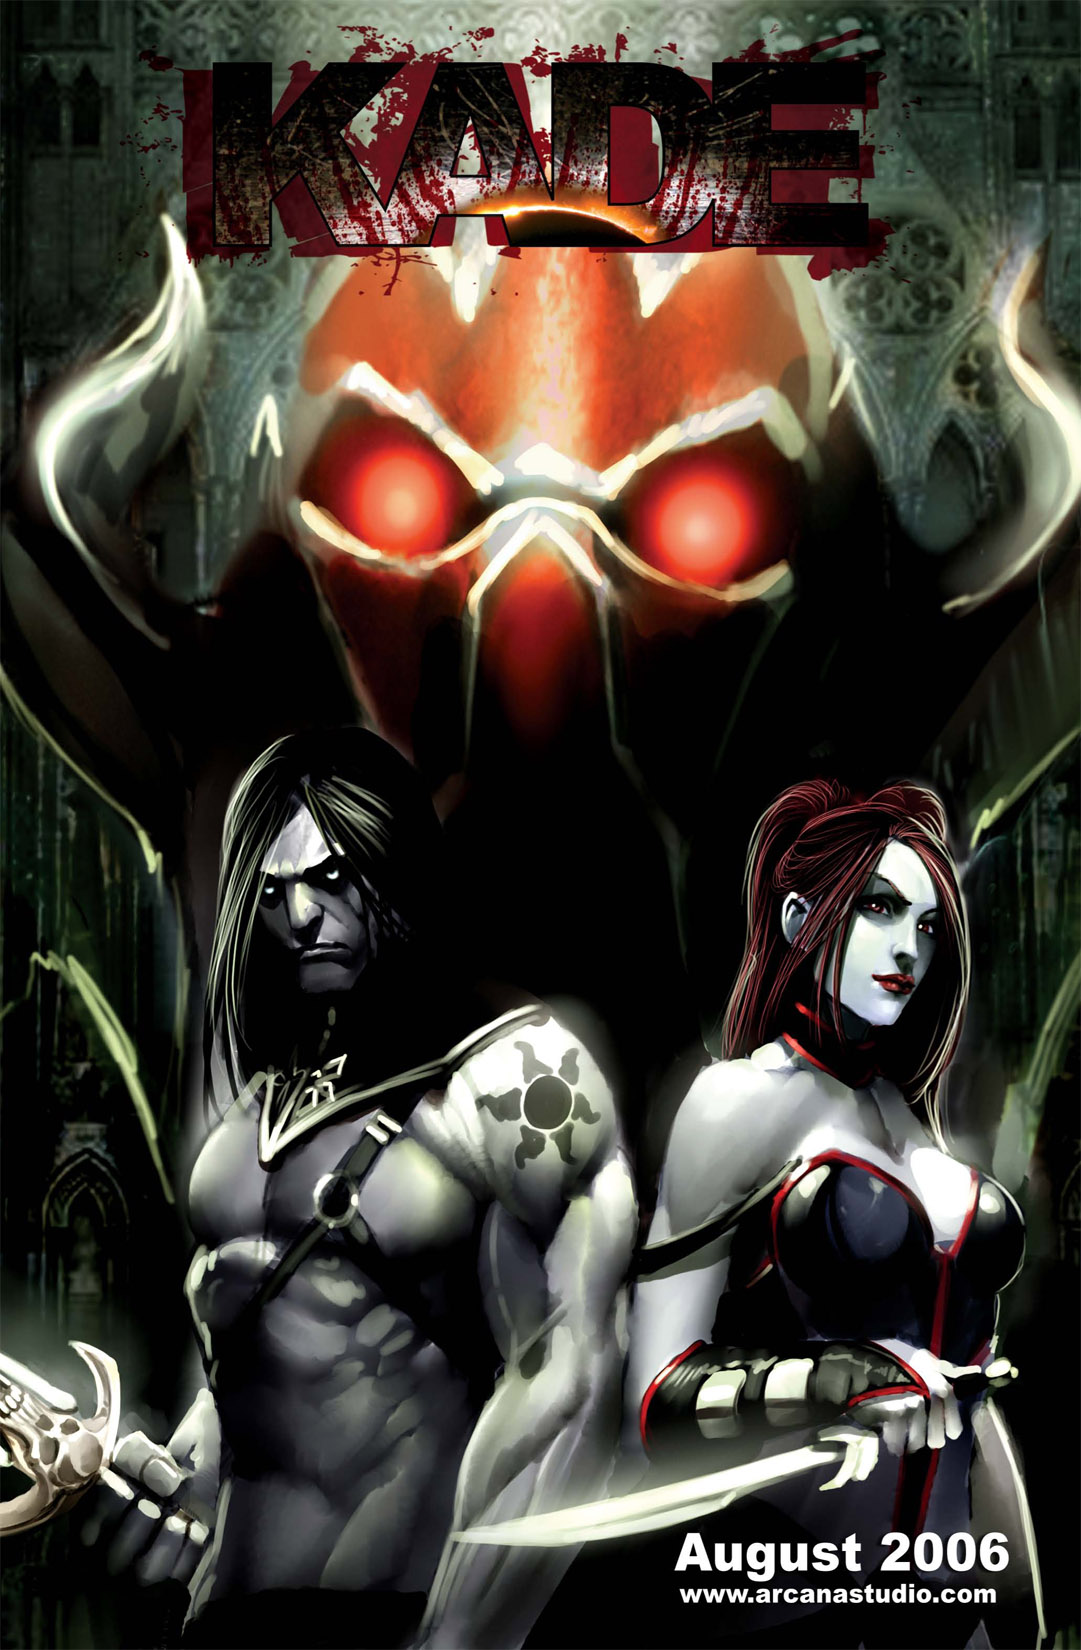 Read online Arcana Studio Presents: Free Comic Book Day comic -  Issue #2006 - 32